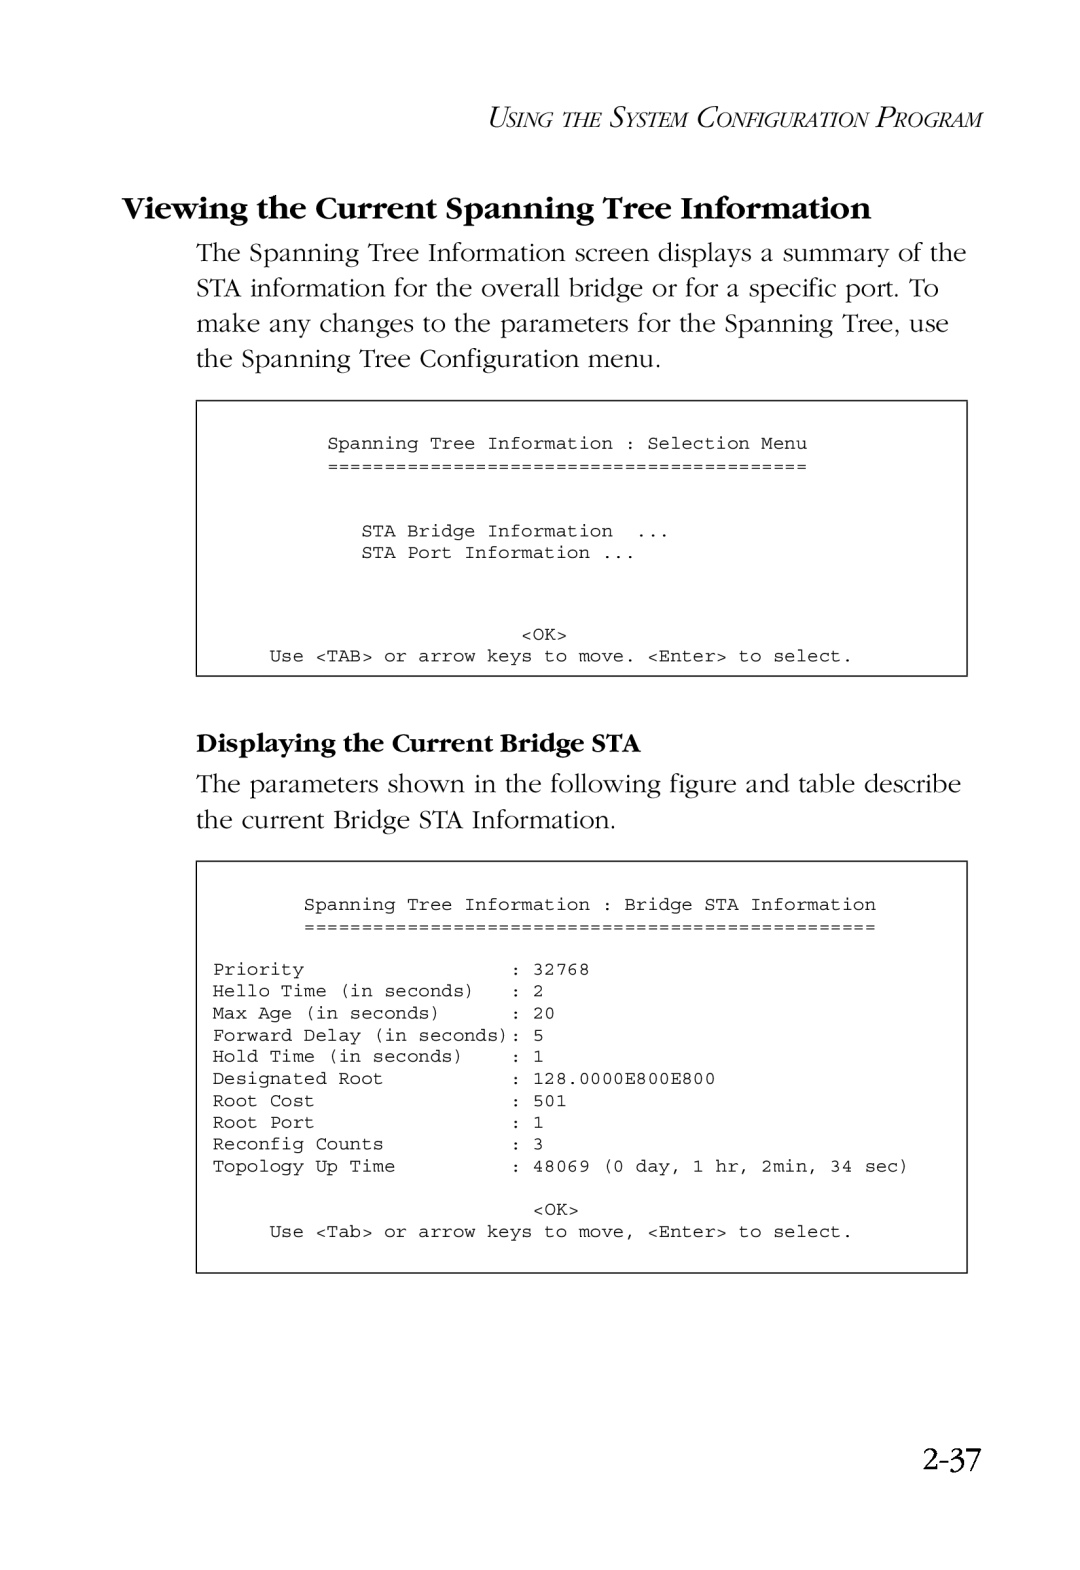 SMC Networks SMC6924VF manual Viewing the Current Spanning Tree Information, 2-37, Displaying the Current Bridge STA 